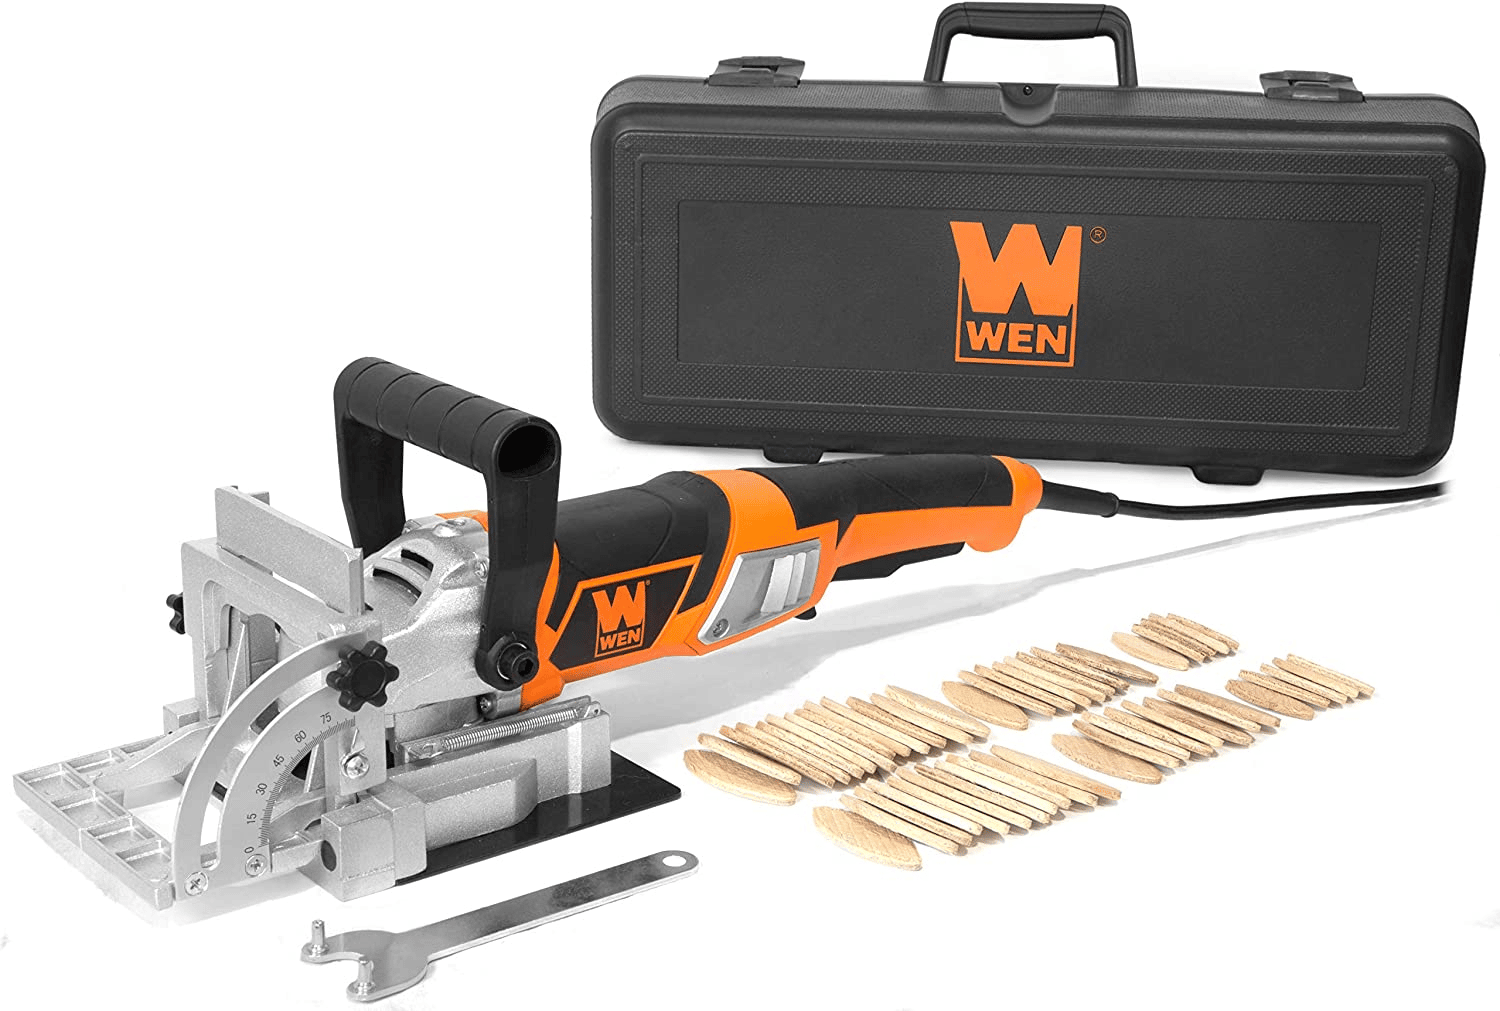 WEN Biscuit Joiner With Case and Biscuits Logo